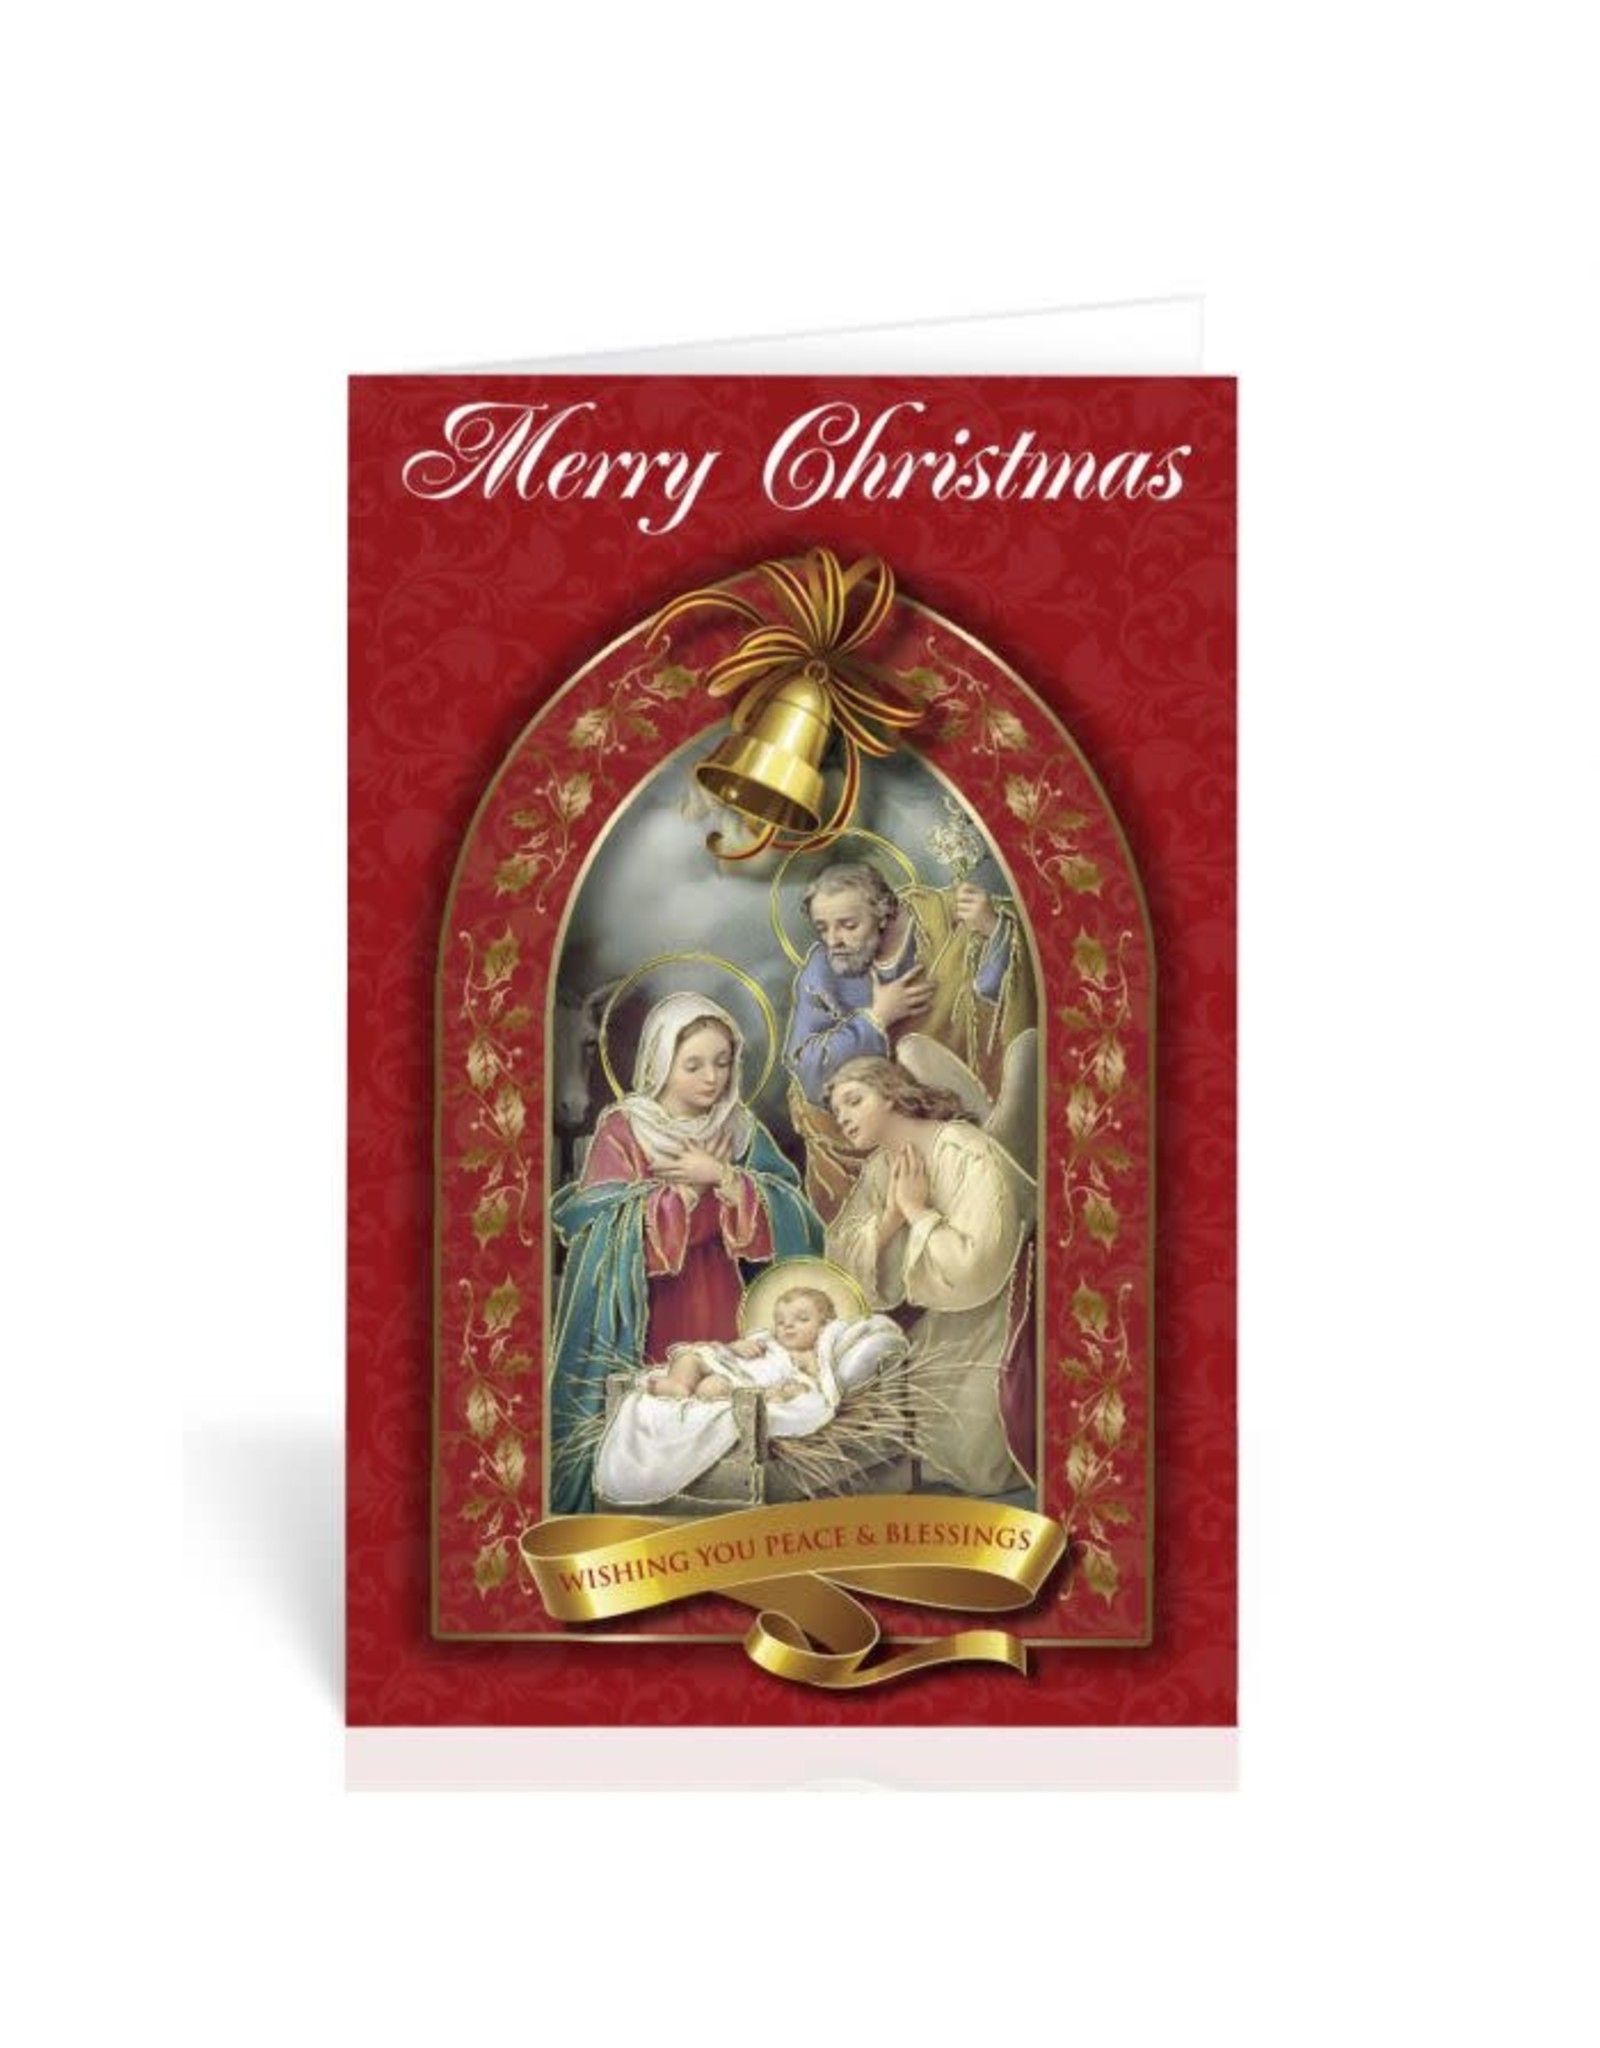 Merry Christmas w/Peace & Blessings Christmas Cards (Box of 10)